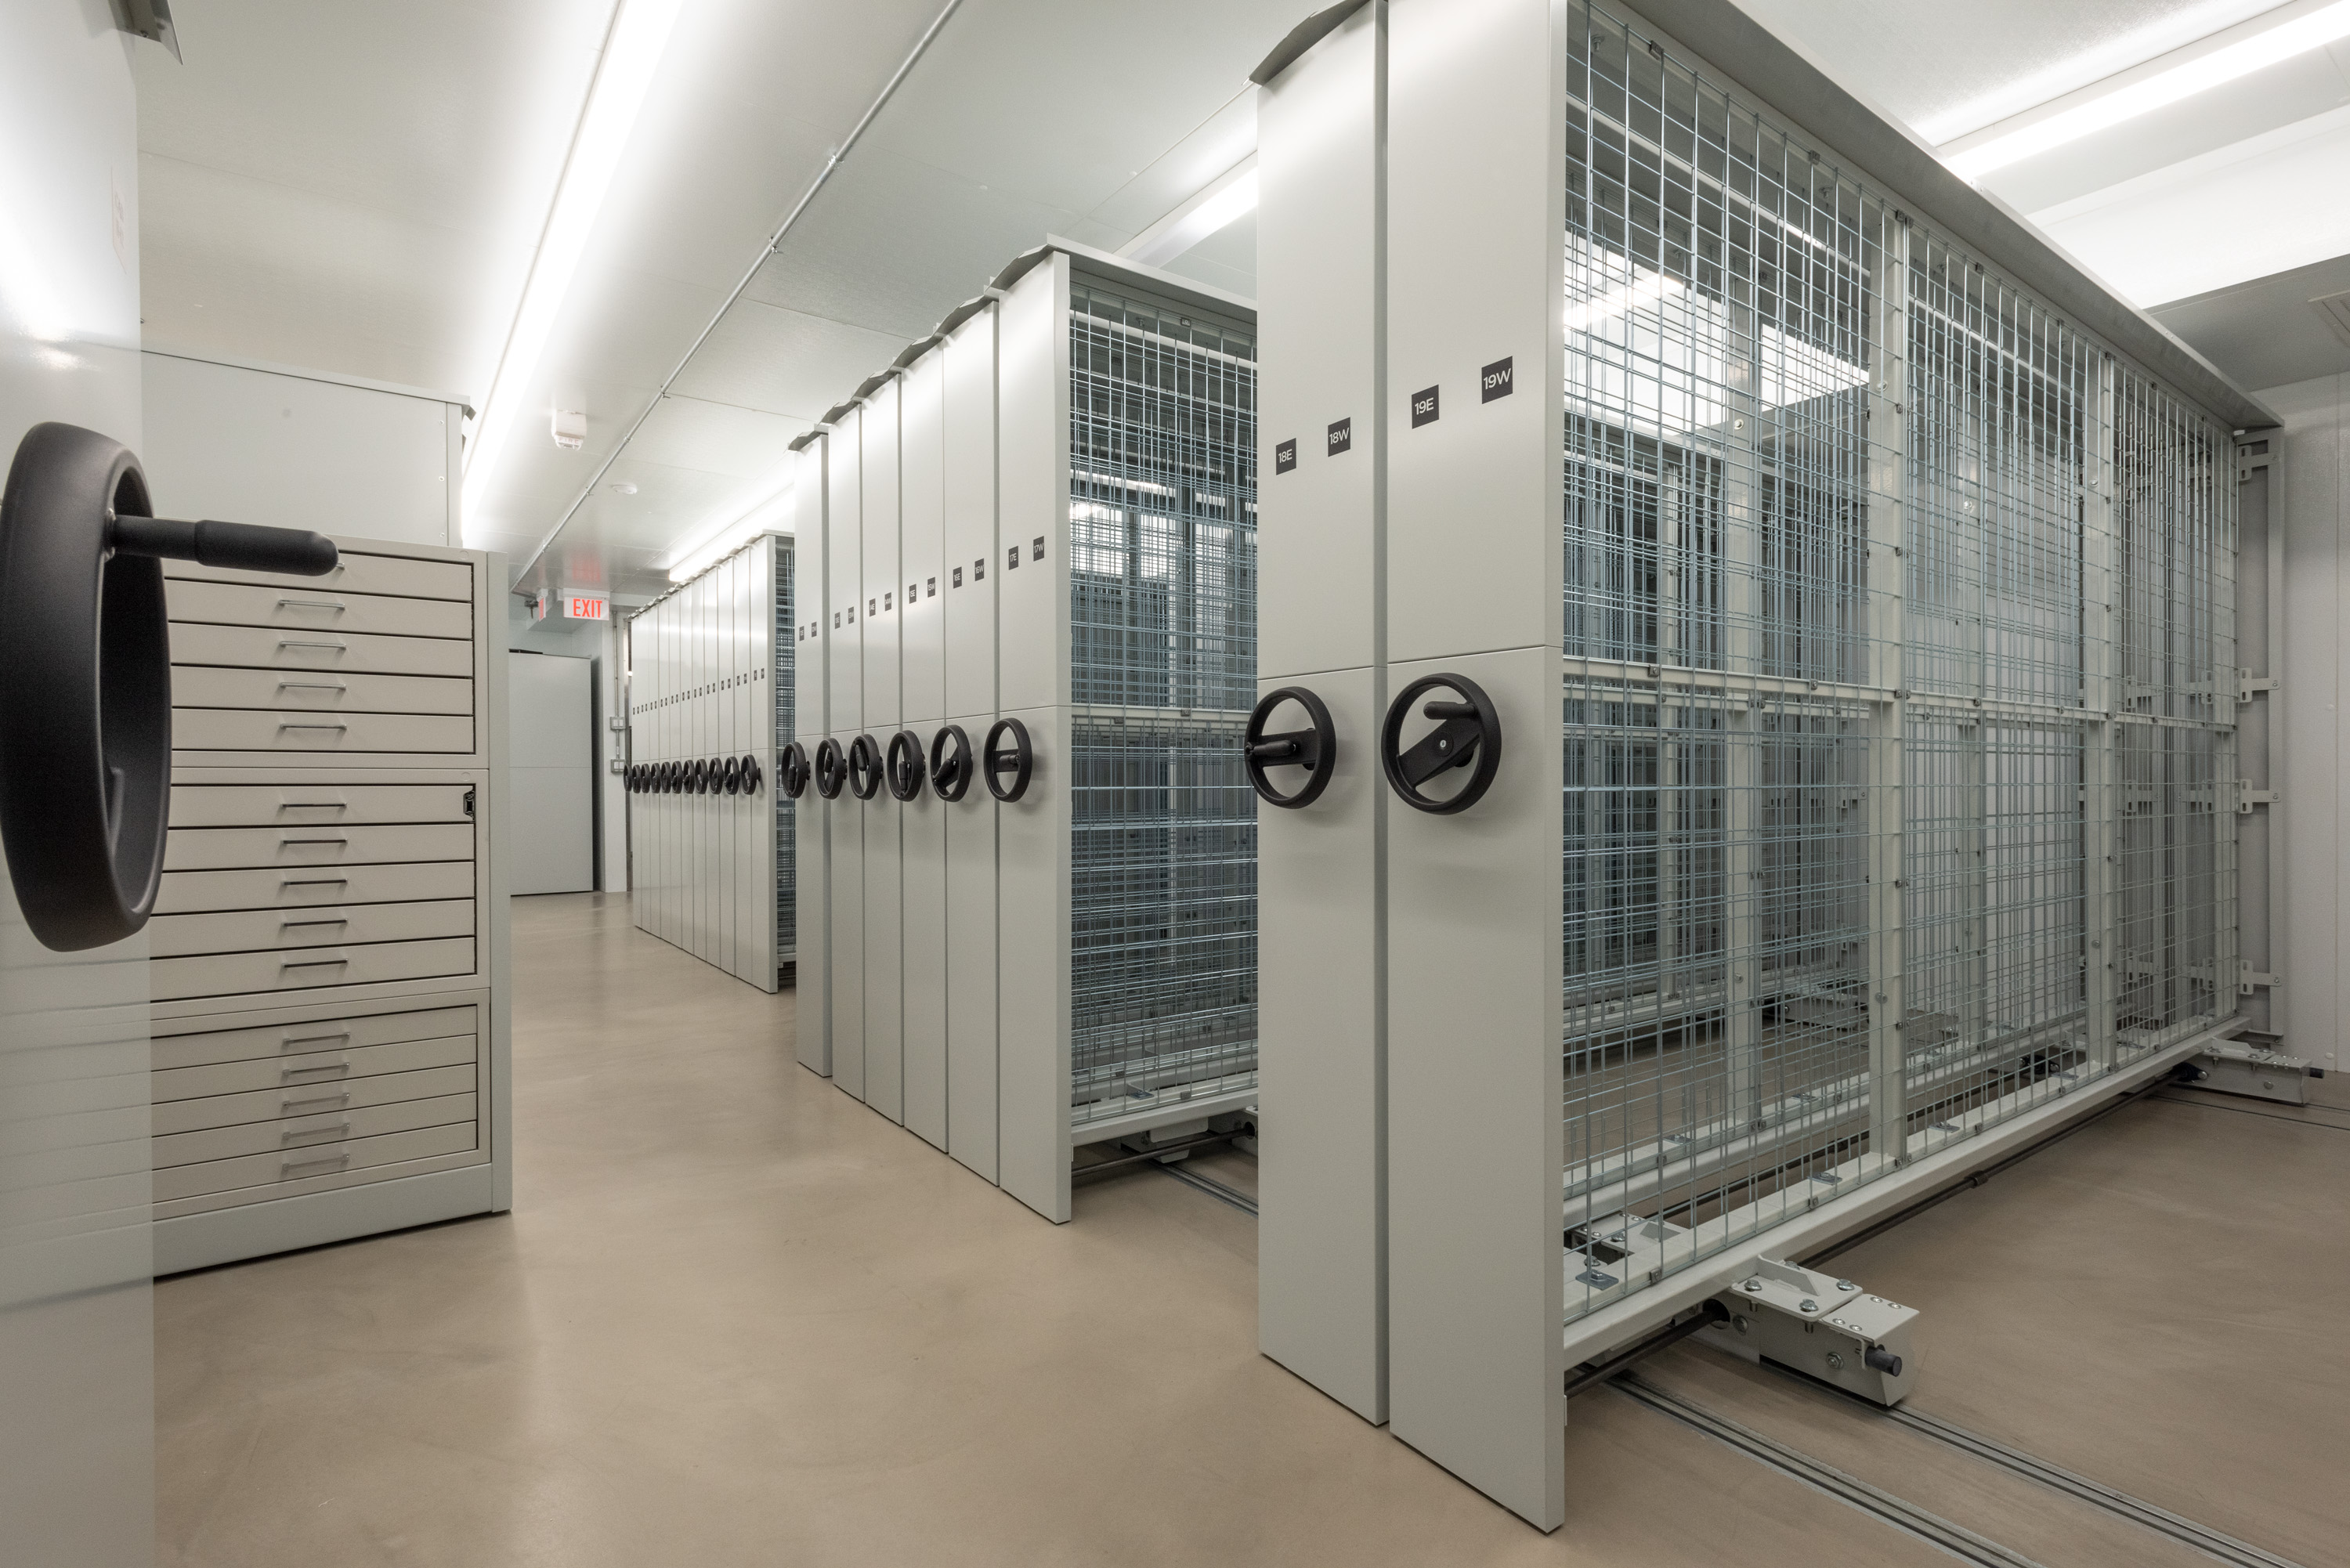 Image of a cold storage room with racks and cabinets